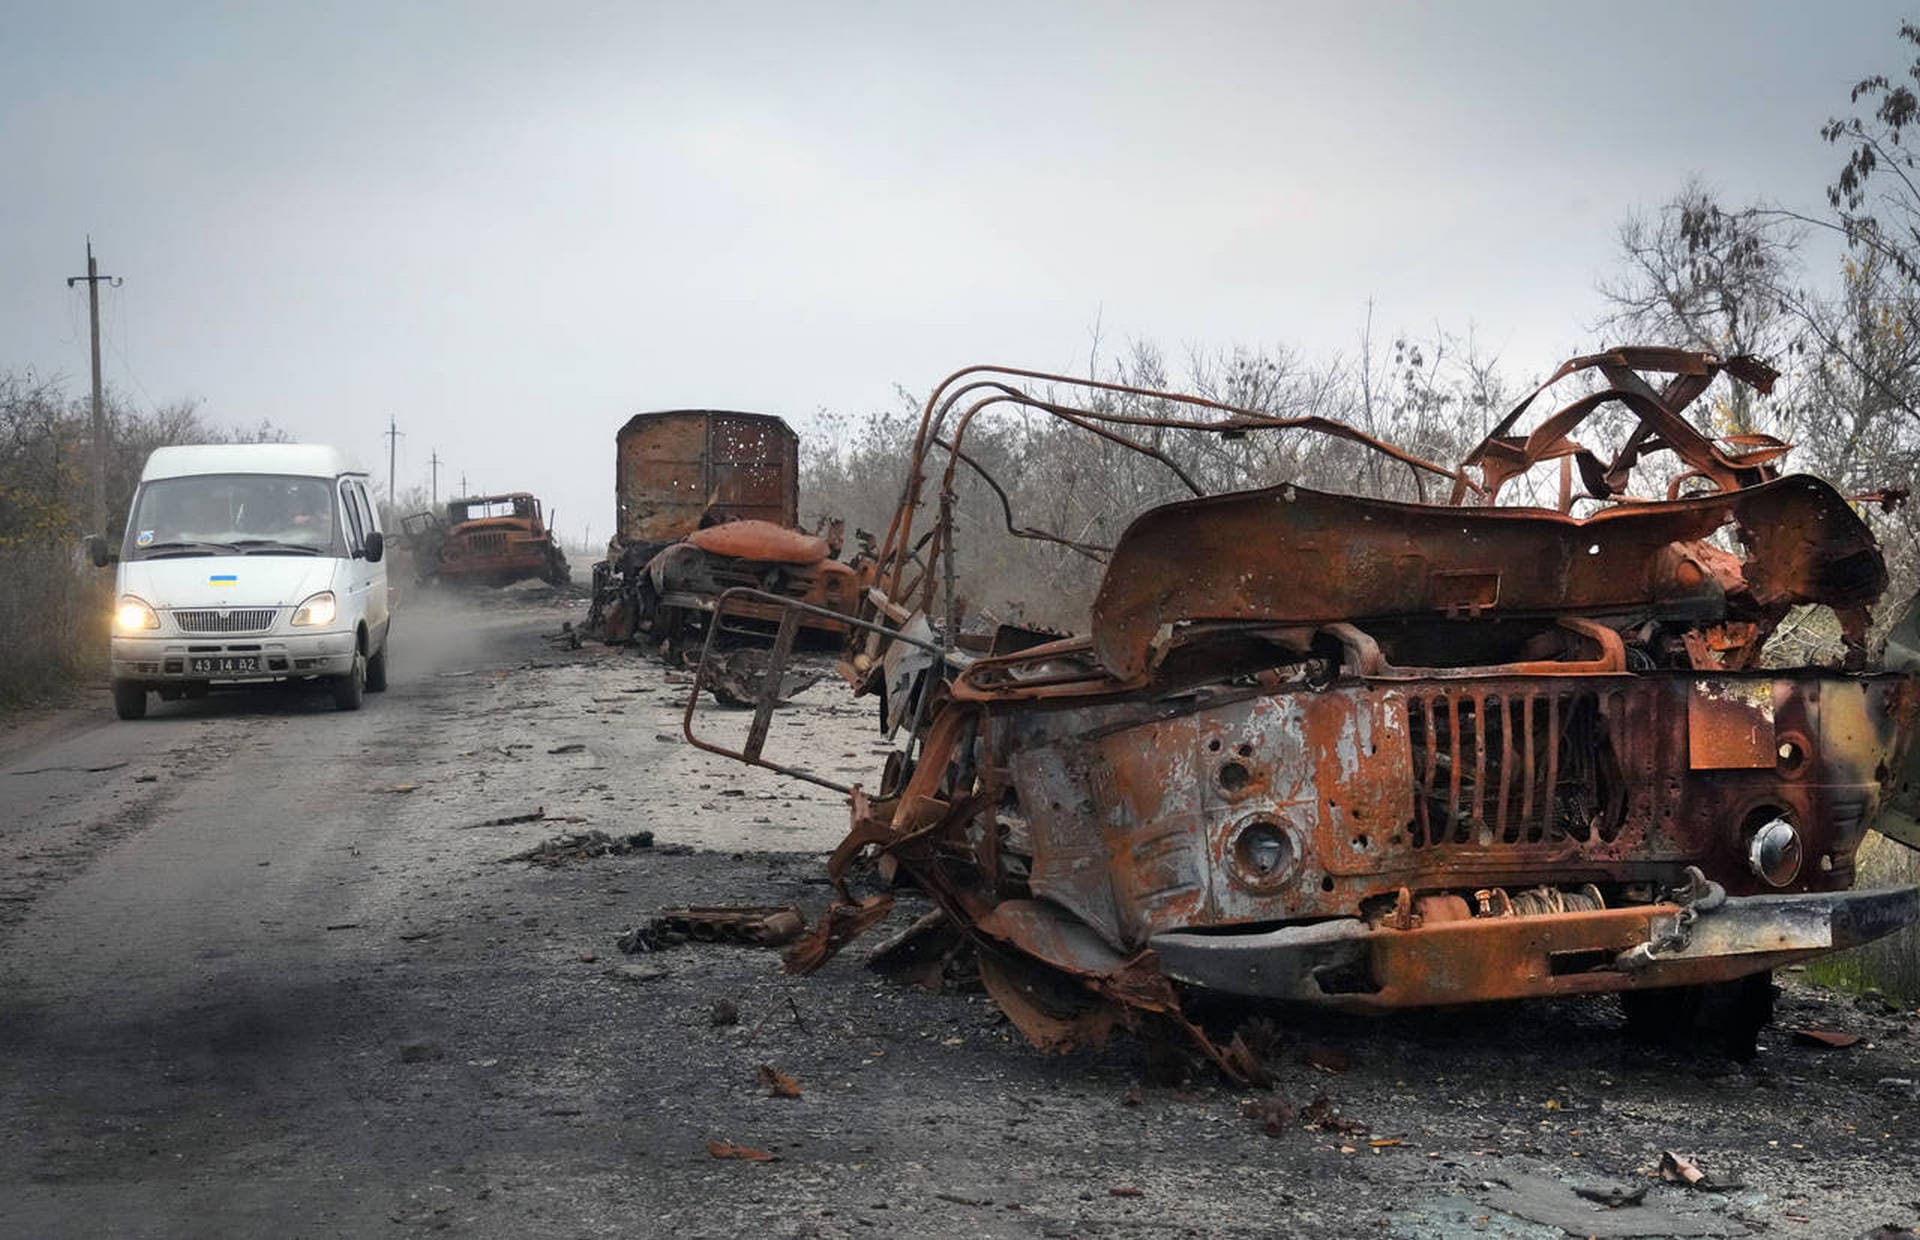 Burnt military cars are seen on the road after heavy battles between Ukrainian troops and Russian invaders in Mykolaiv region, Ukraine